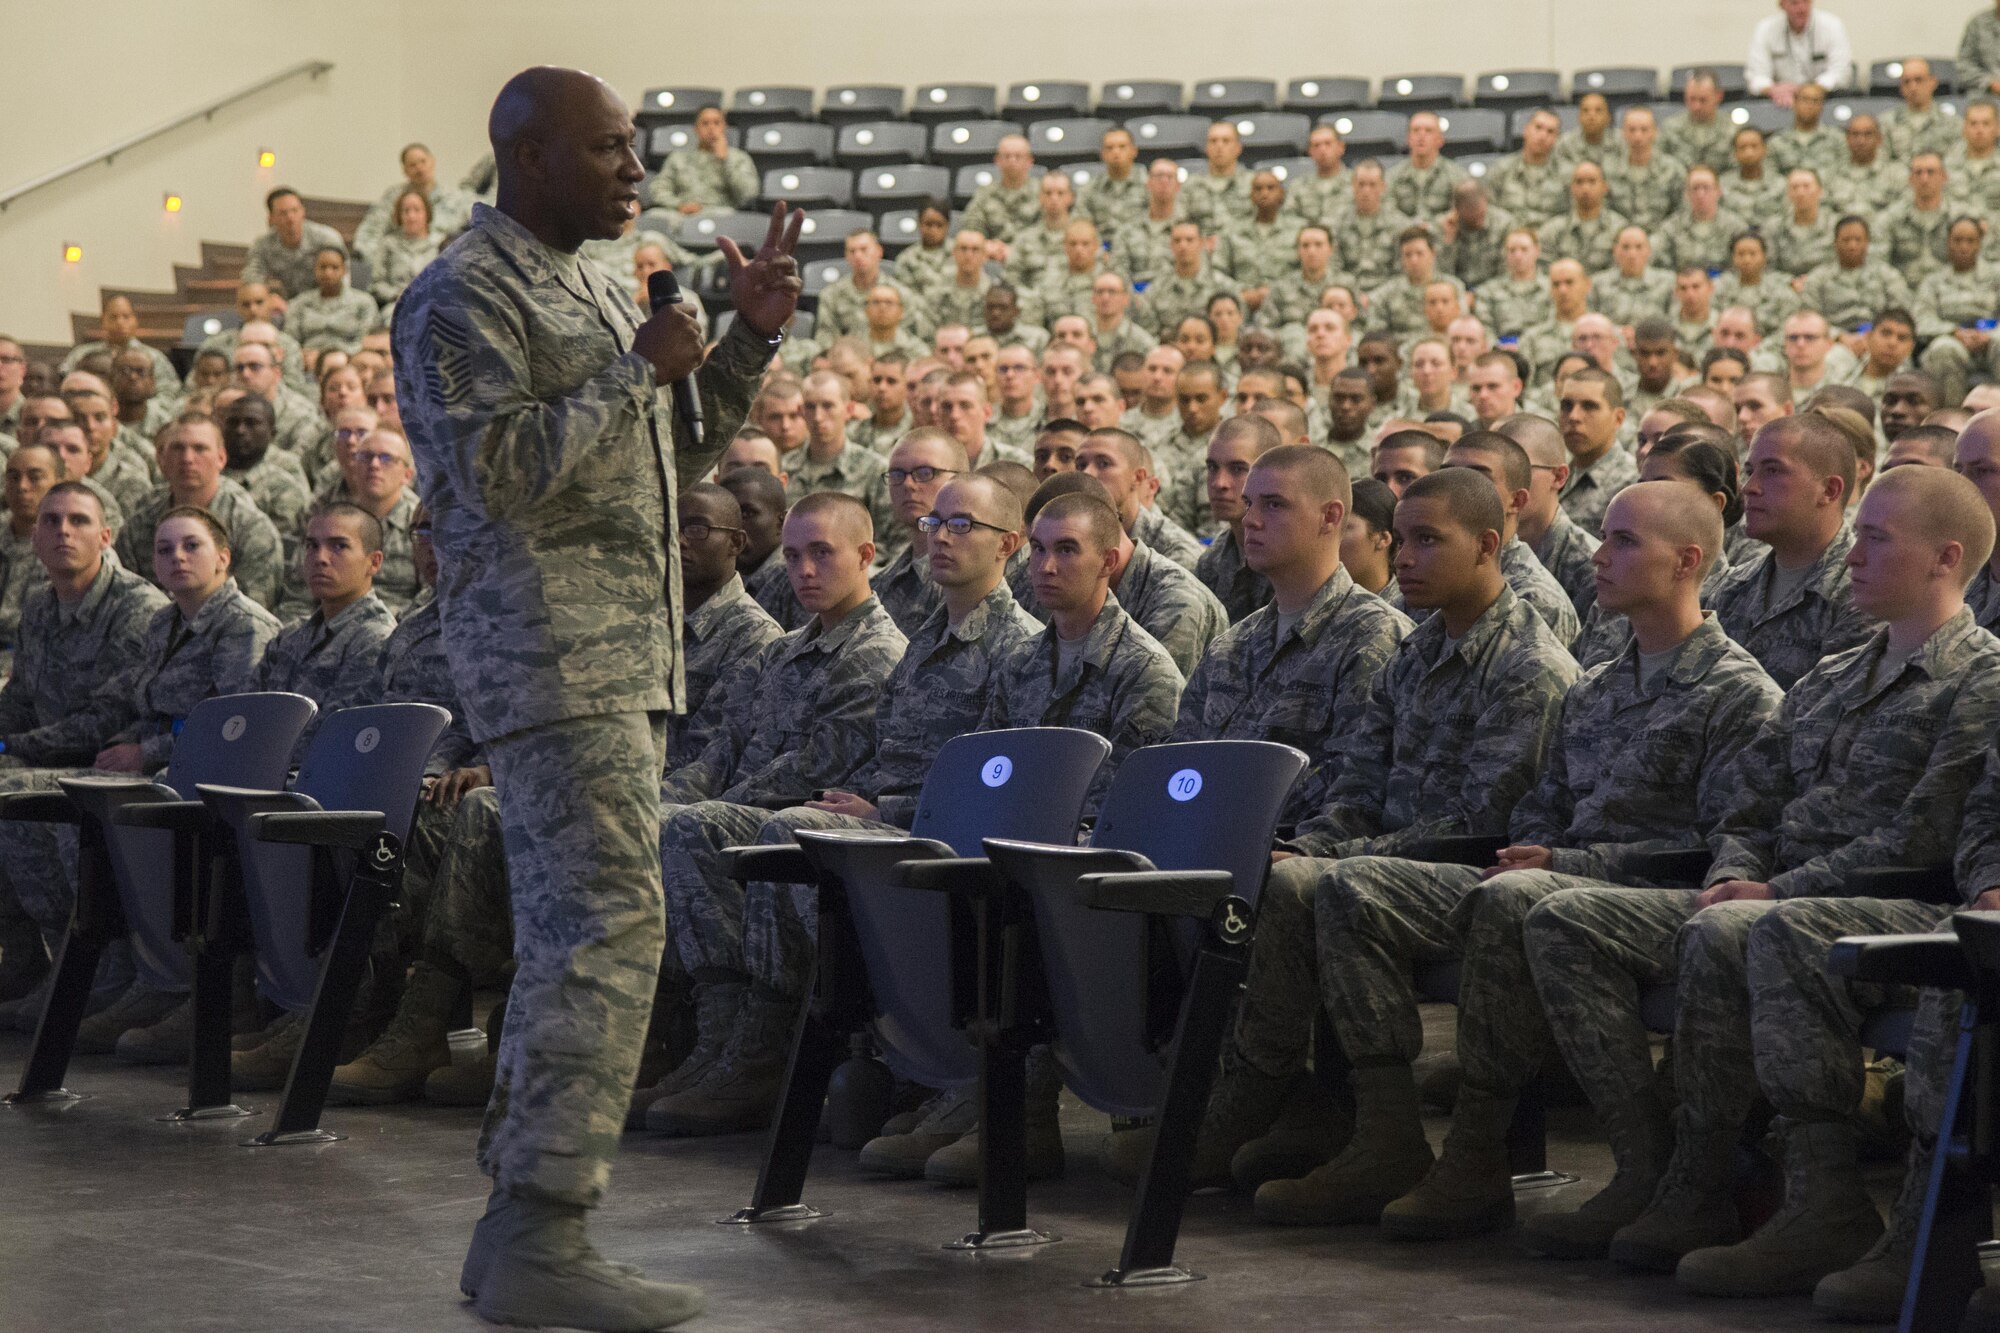 Chief Master Sgt. of the Air Force Kaleth O. Wright delivers a speech to Airmen from
the 326th Training Squadron May 3, 2017, inside the Pfingston Reception Center
auditorium at Joint Base San Antonio-Lackland. The CMSAF visited JBSA-Lackland
on his initial immersion tour of Air Force Basic Military Training and Airmen’s
Week, a week-long discussion-based course designed to help new Airmen
internalize the Air Force core values while developing professionalism, resiliency
and an Airmen’s corps inspired by heritage and motivated to deliver Air Power for
America. 